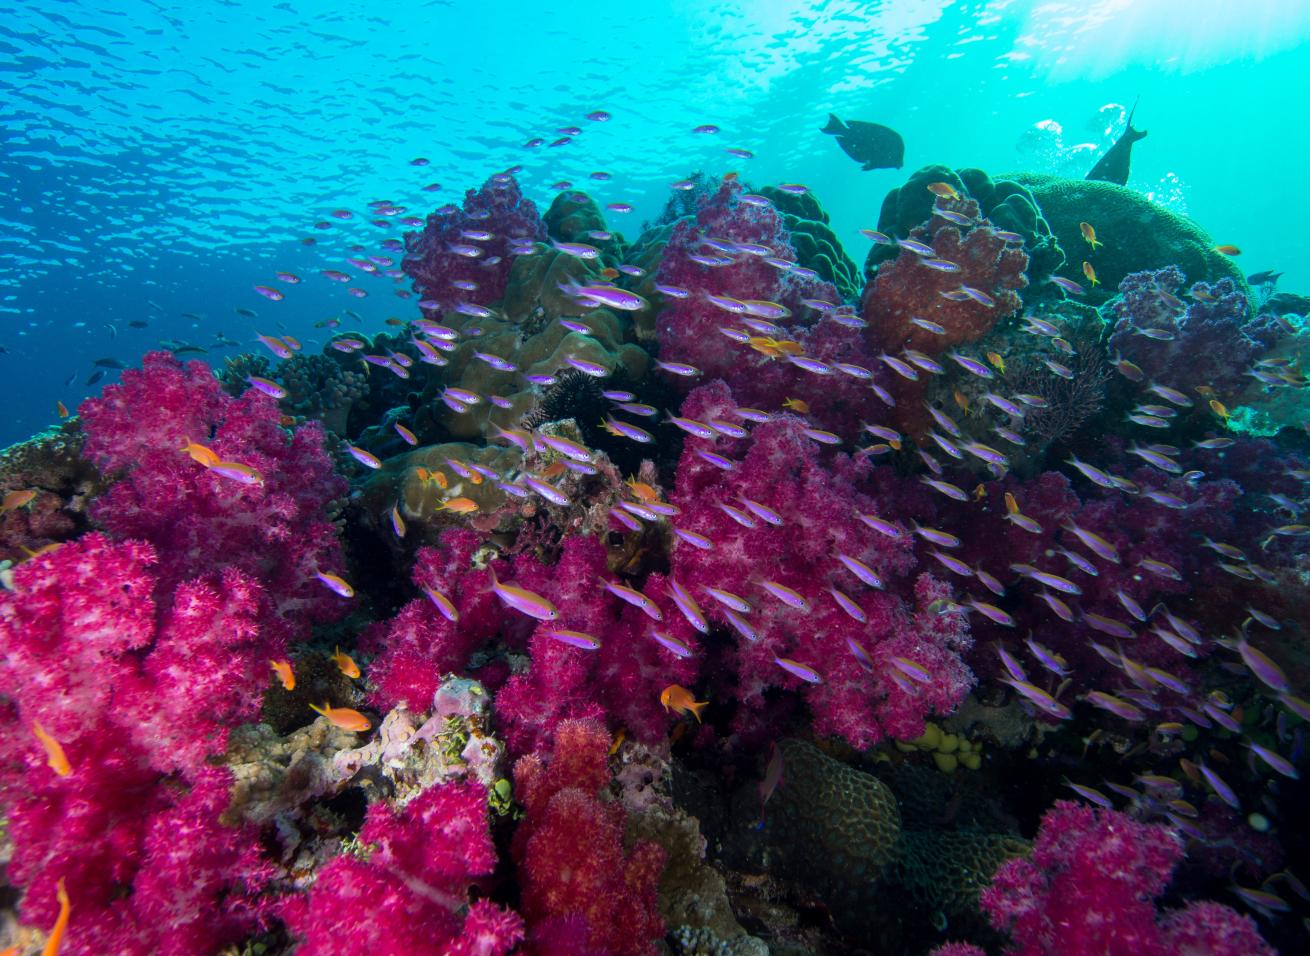 Fiji is commonly known for its clear waters and vibrant marine life